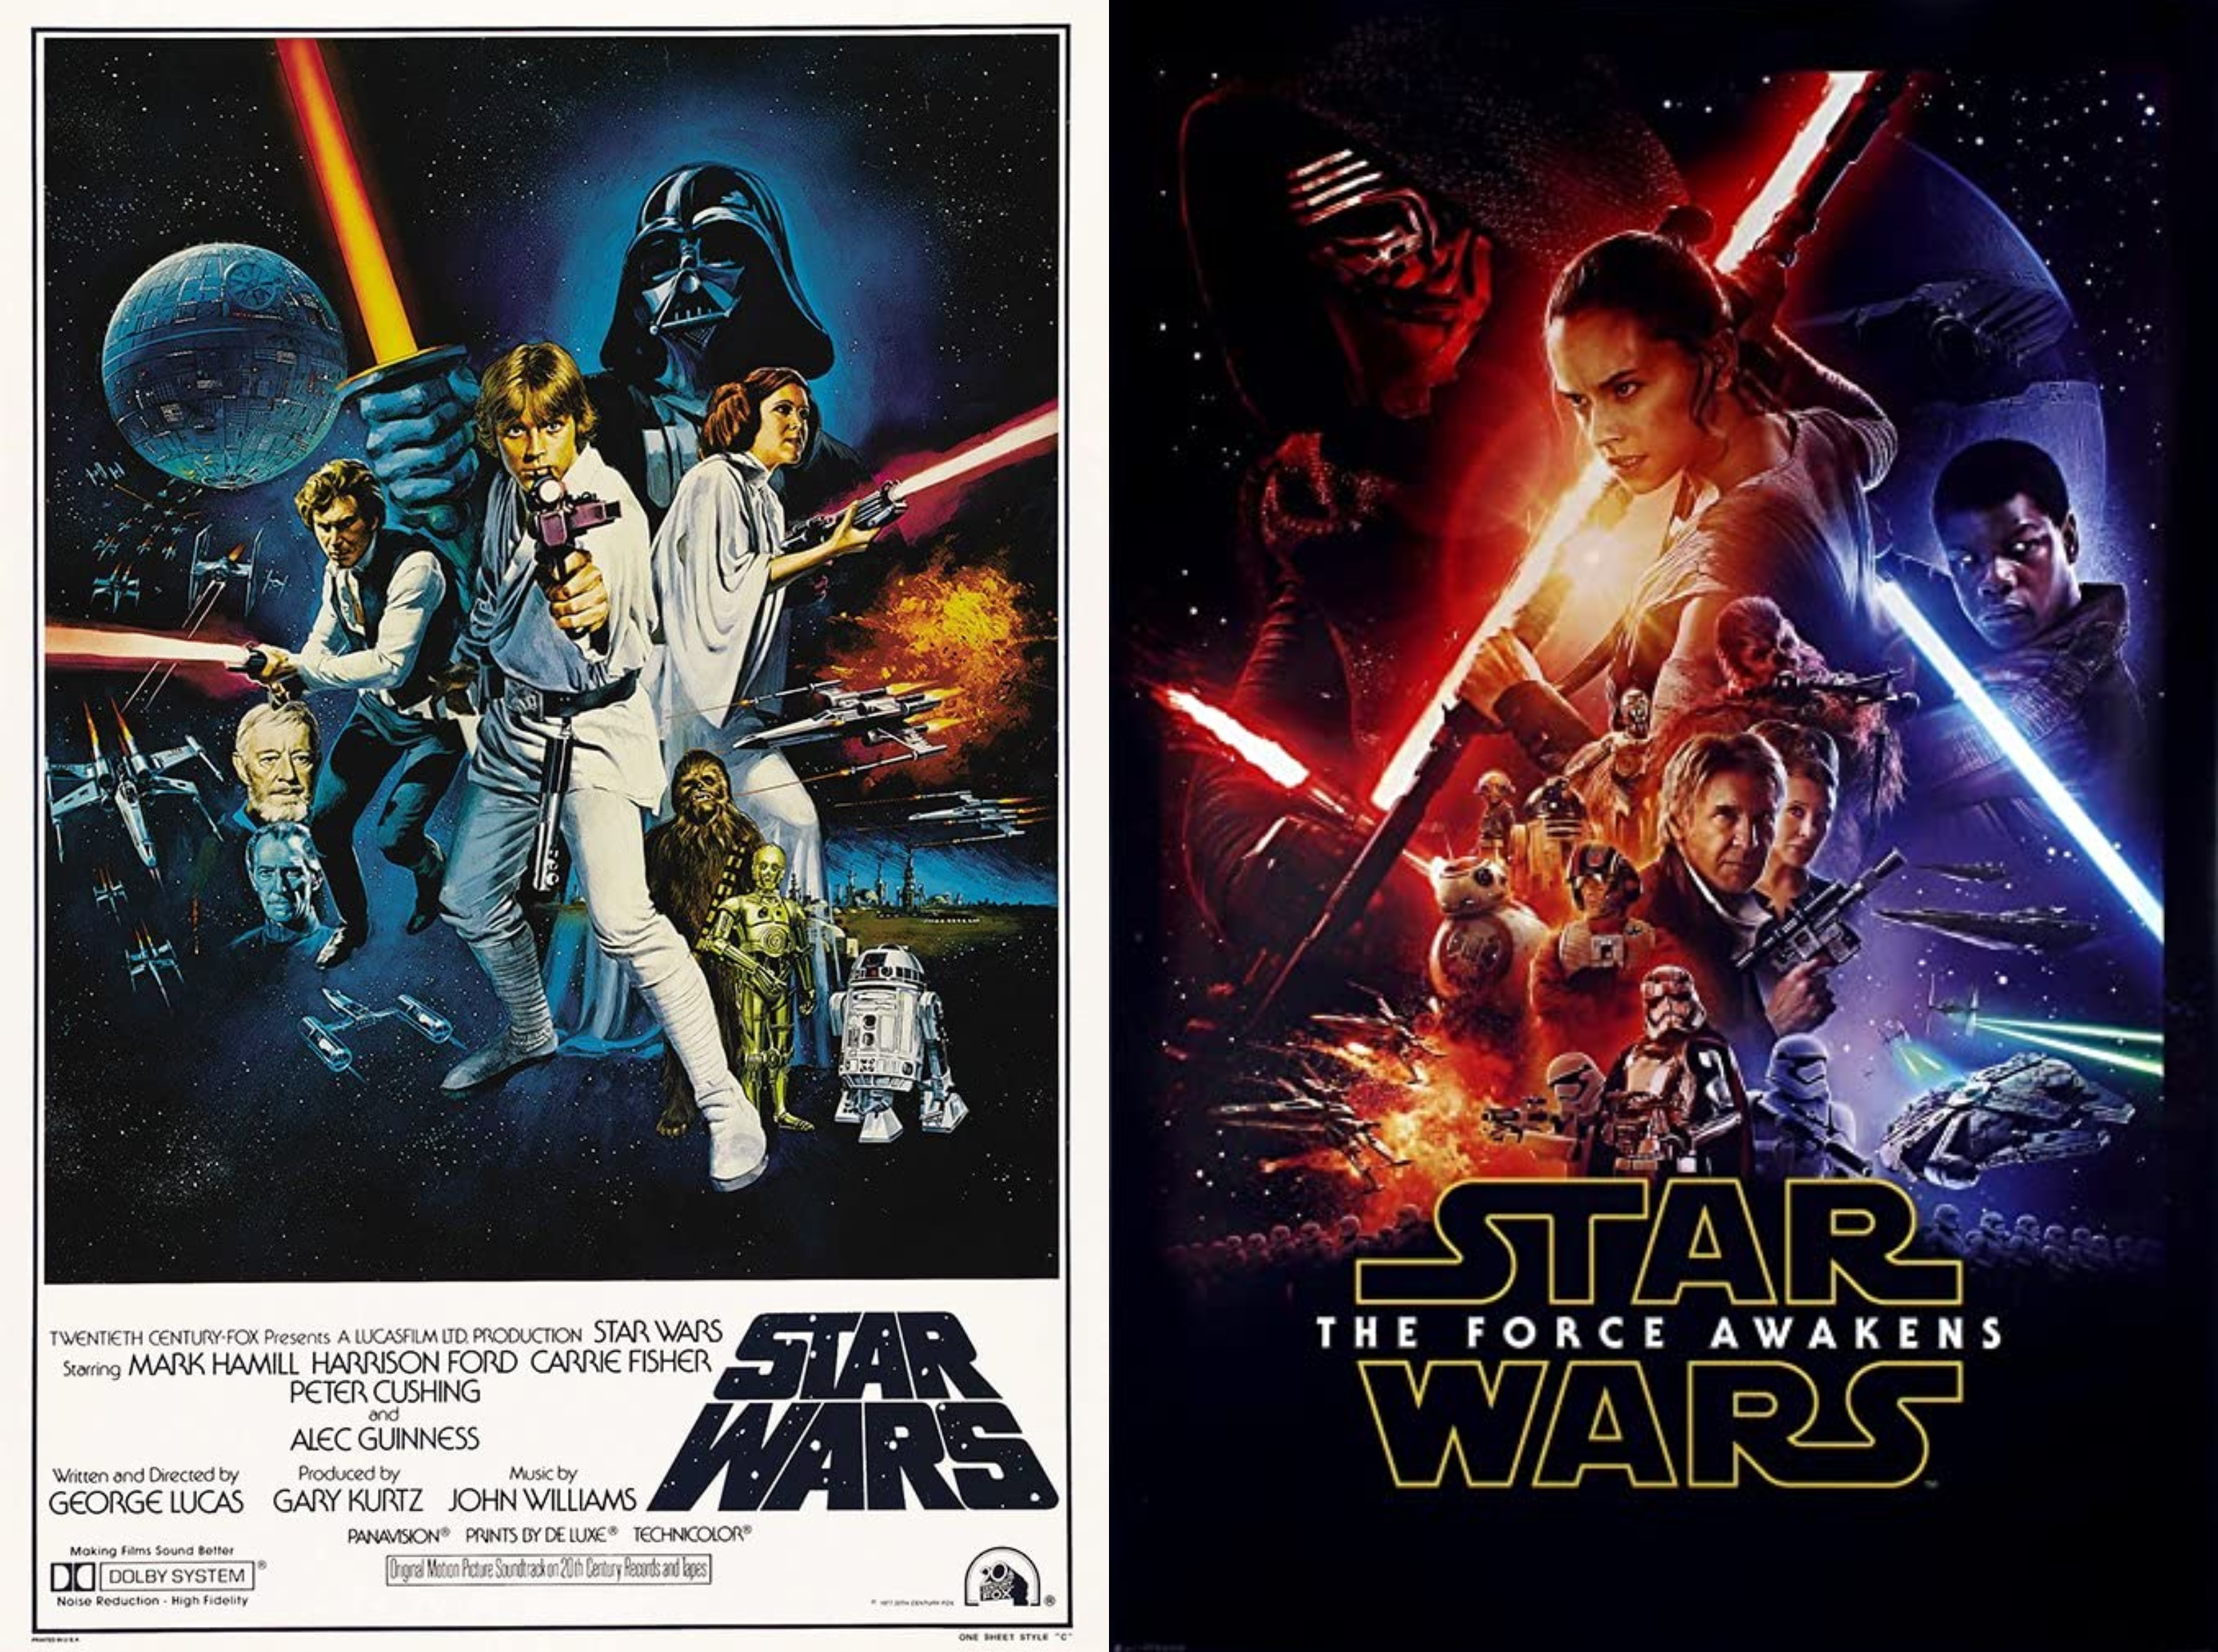 Posters for A New Hope and The Force Awakens